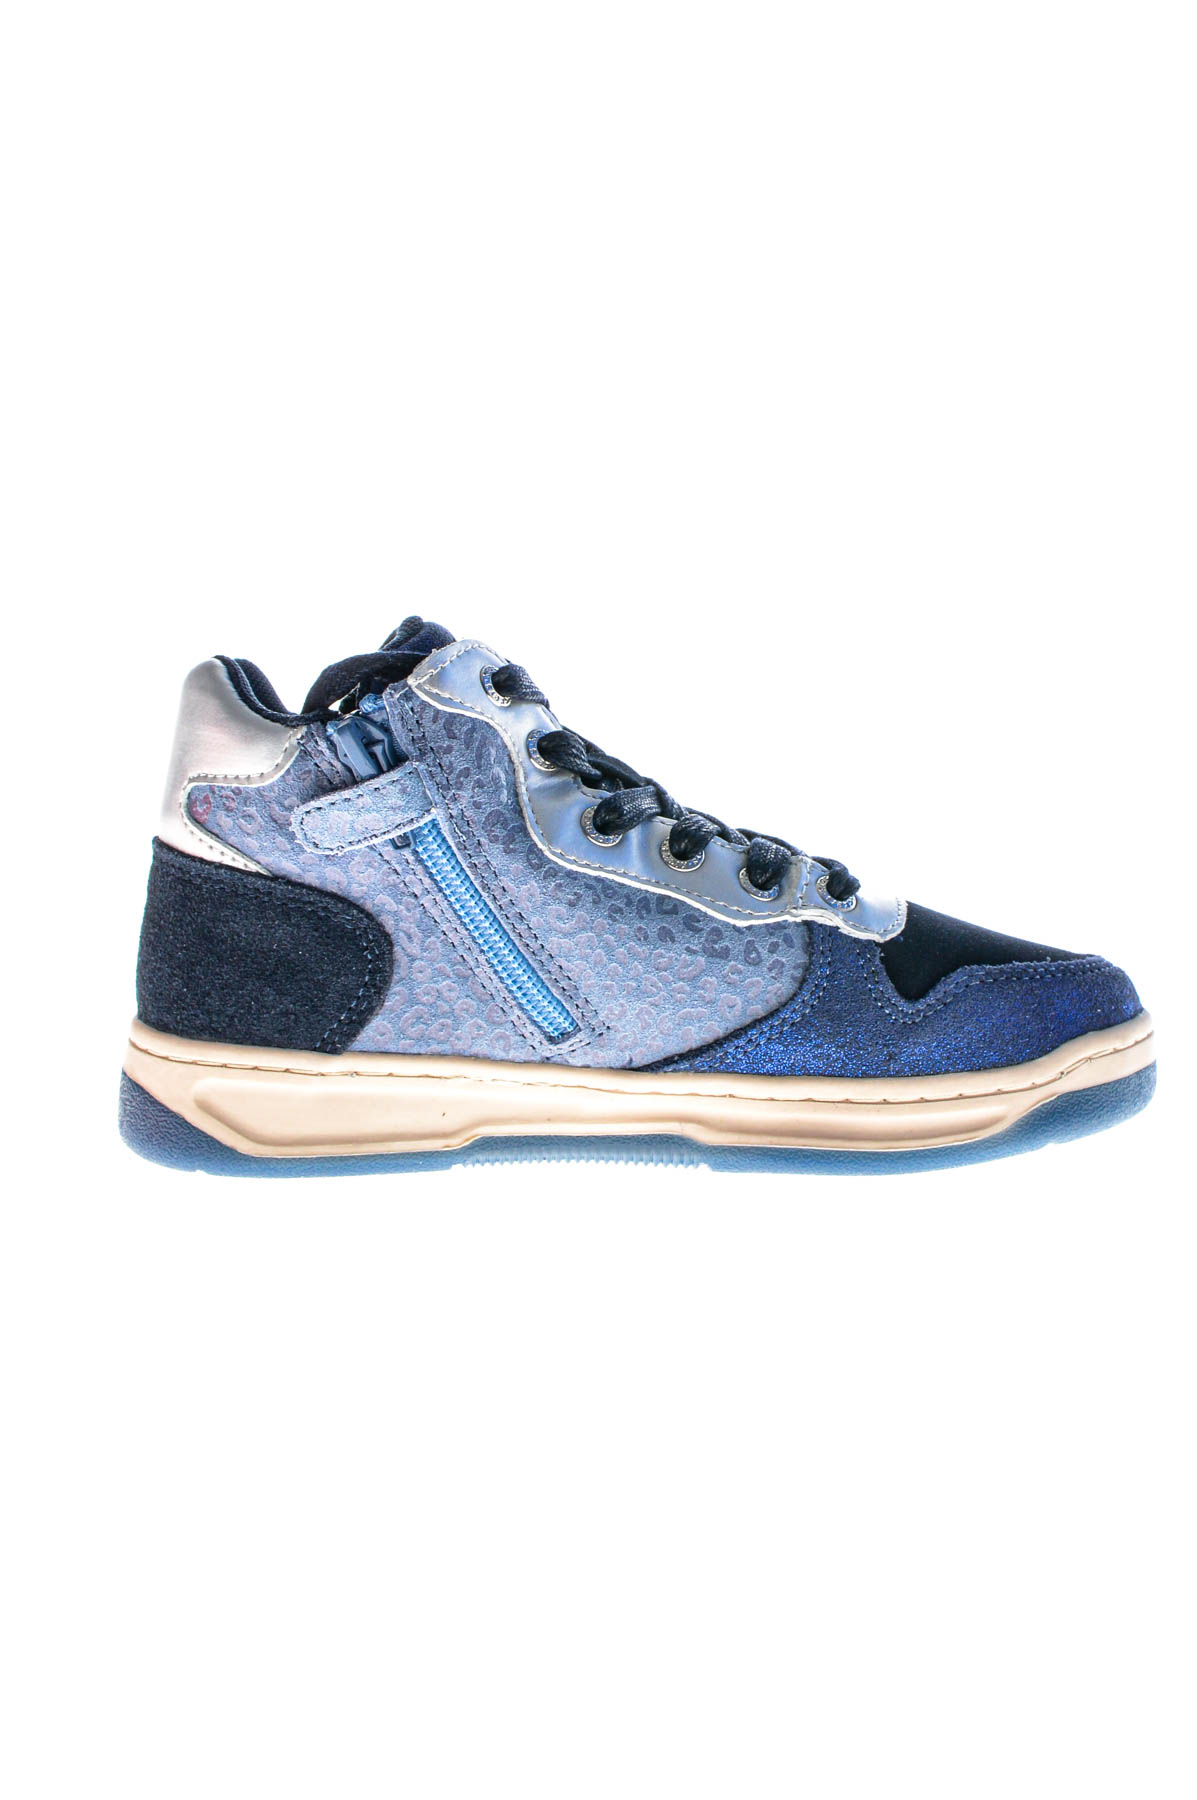 Sneakers for girls - KicKers - 2